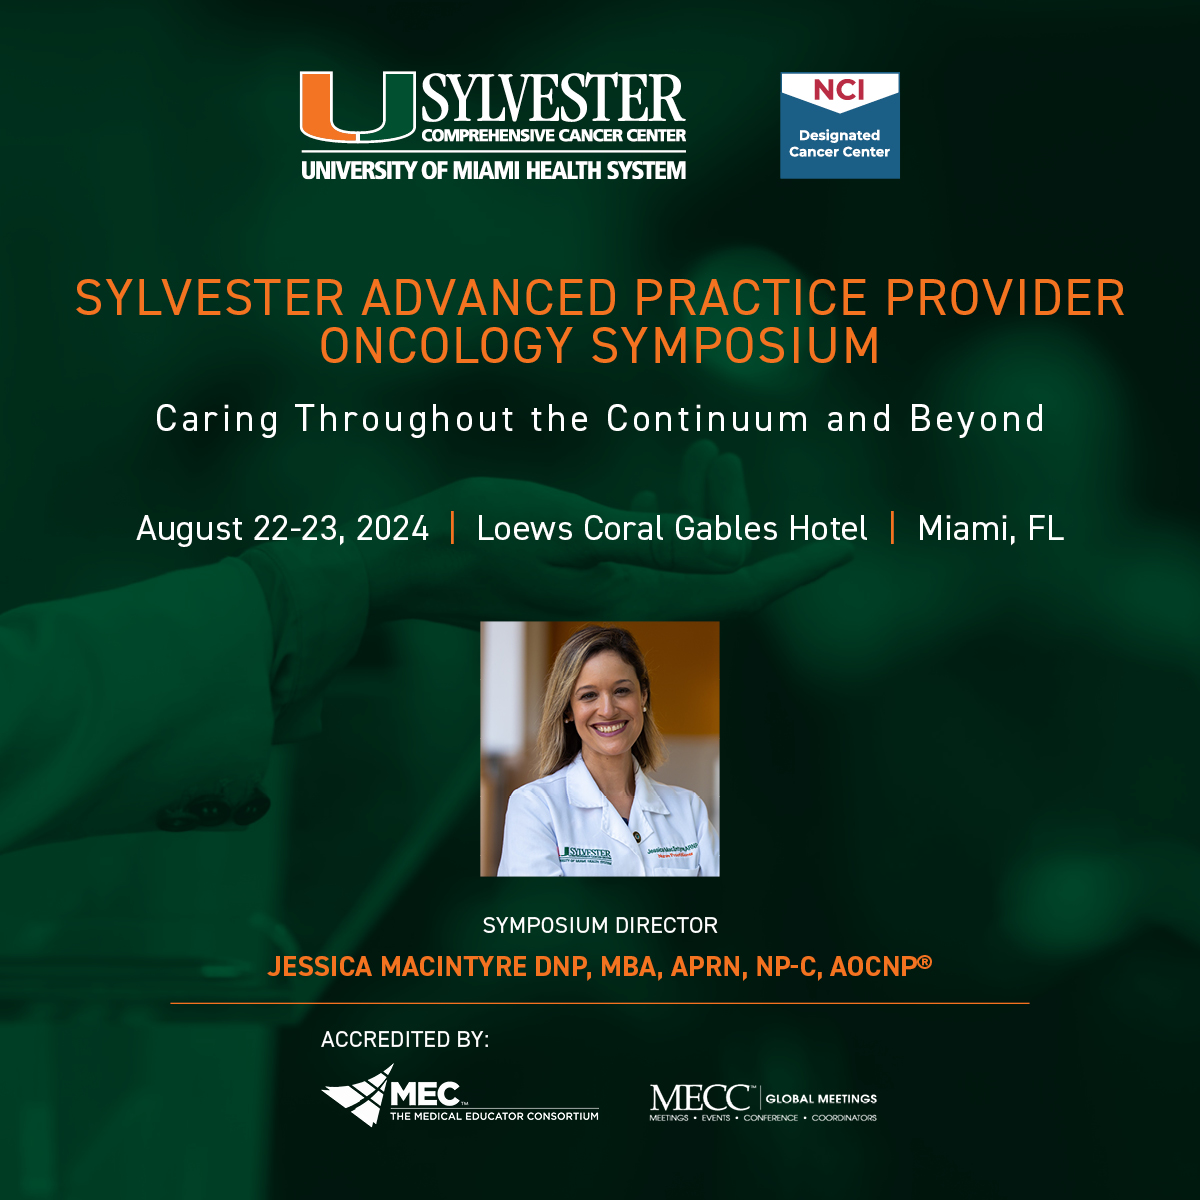 Save the date! Join us for the Sylvester Advanced Practice Provider #Oncology #Symposium. Topics will include #cancer prevention, diagnoses, treatment & more. Learn more: loom.ly/2Xcf8Tc. 🗓️ August 22-23, 2024 📍 Loews Coral Gables Hotel 🥼 @jessiemac07